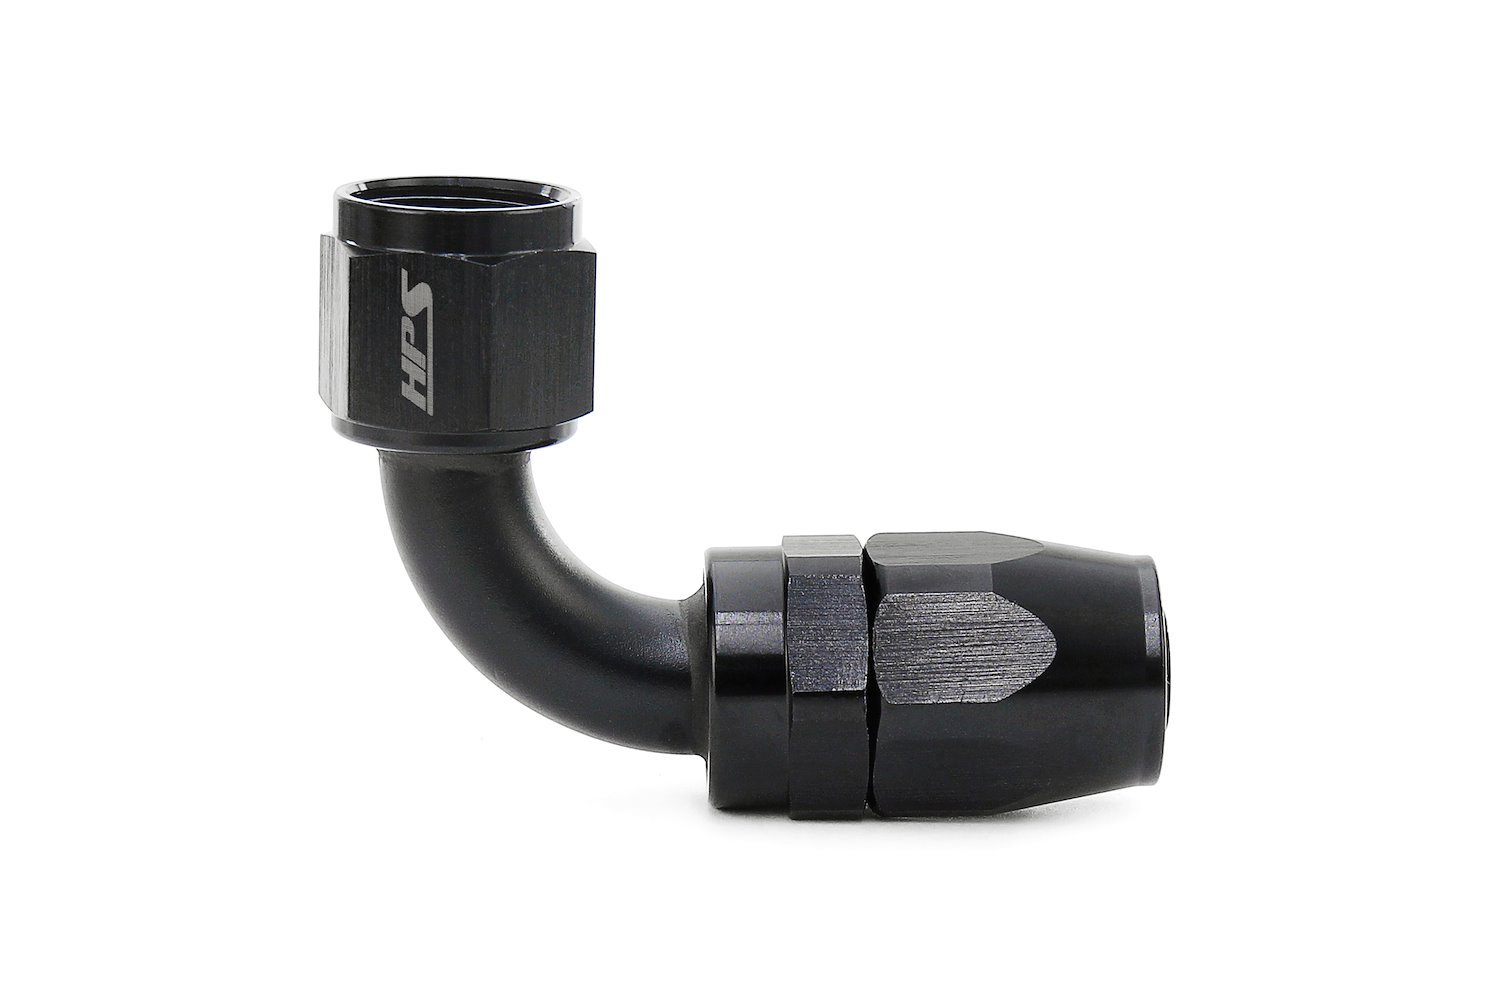 250-9016 250 Series 90-Deg Hose End, Reusable Compression Style Hose End Fitting, Easily Assembles w/ Hand Tools